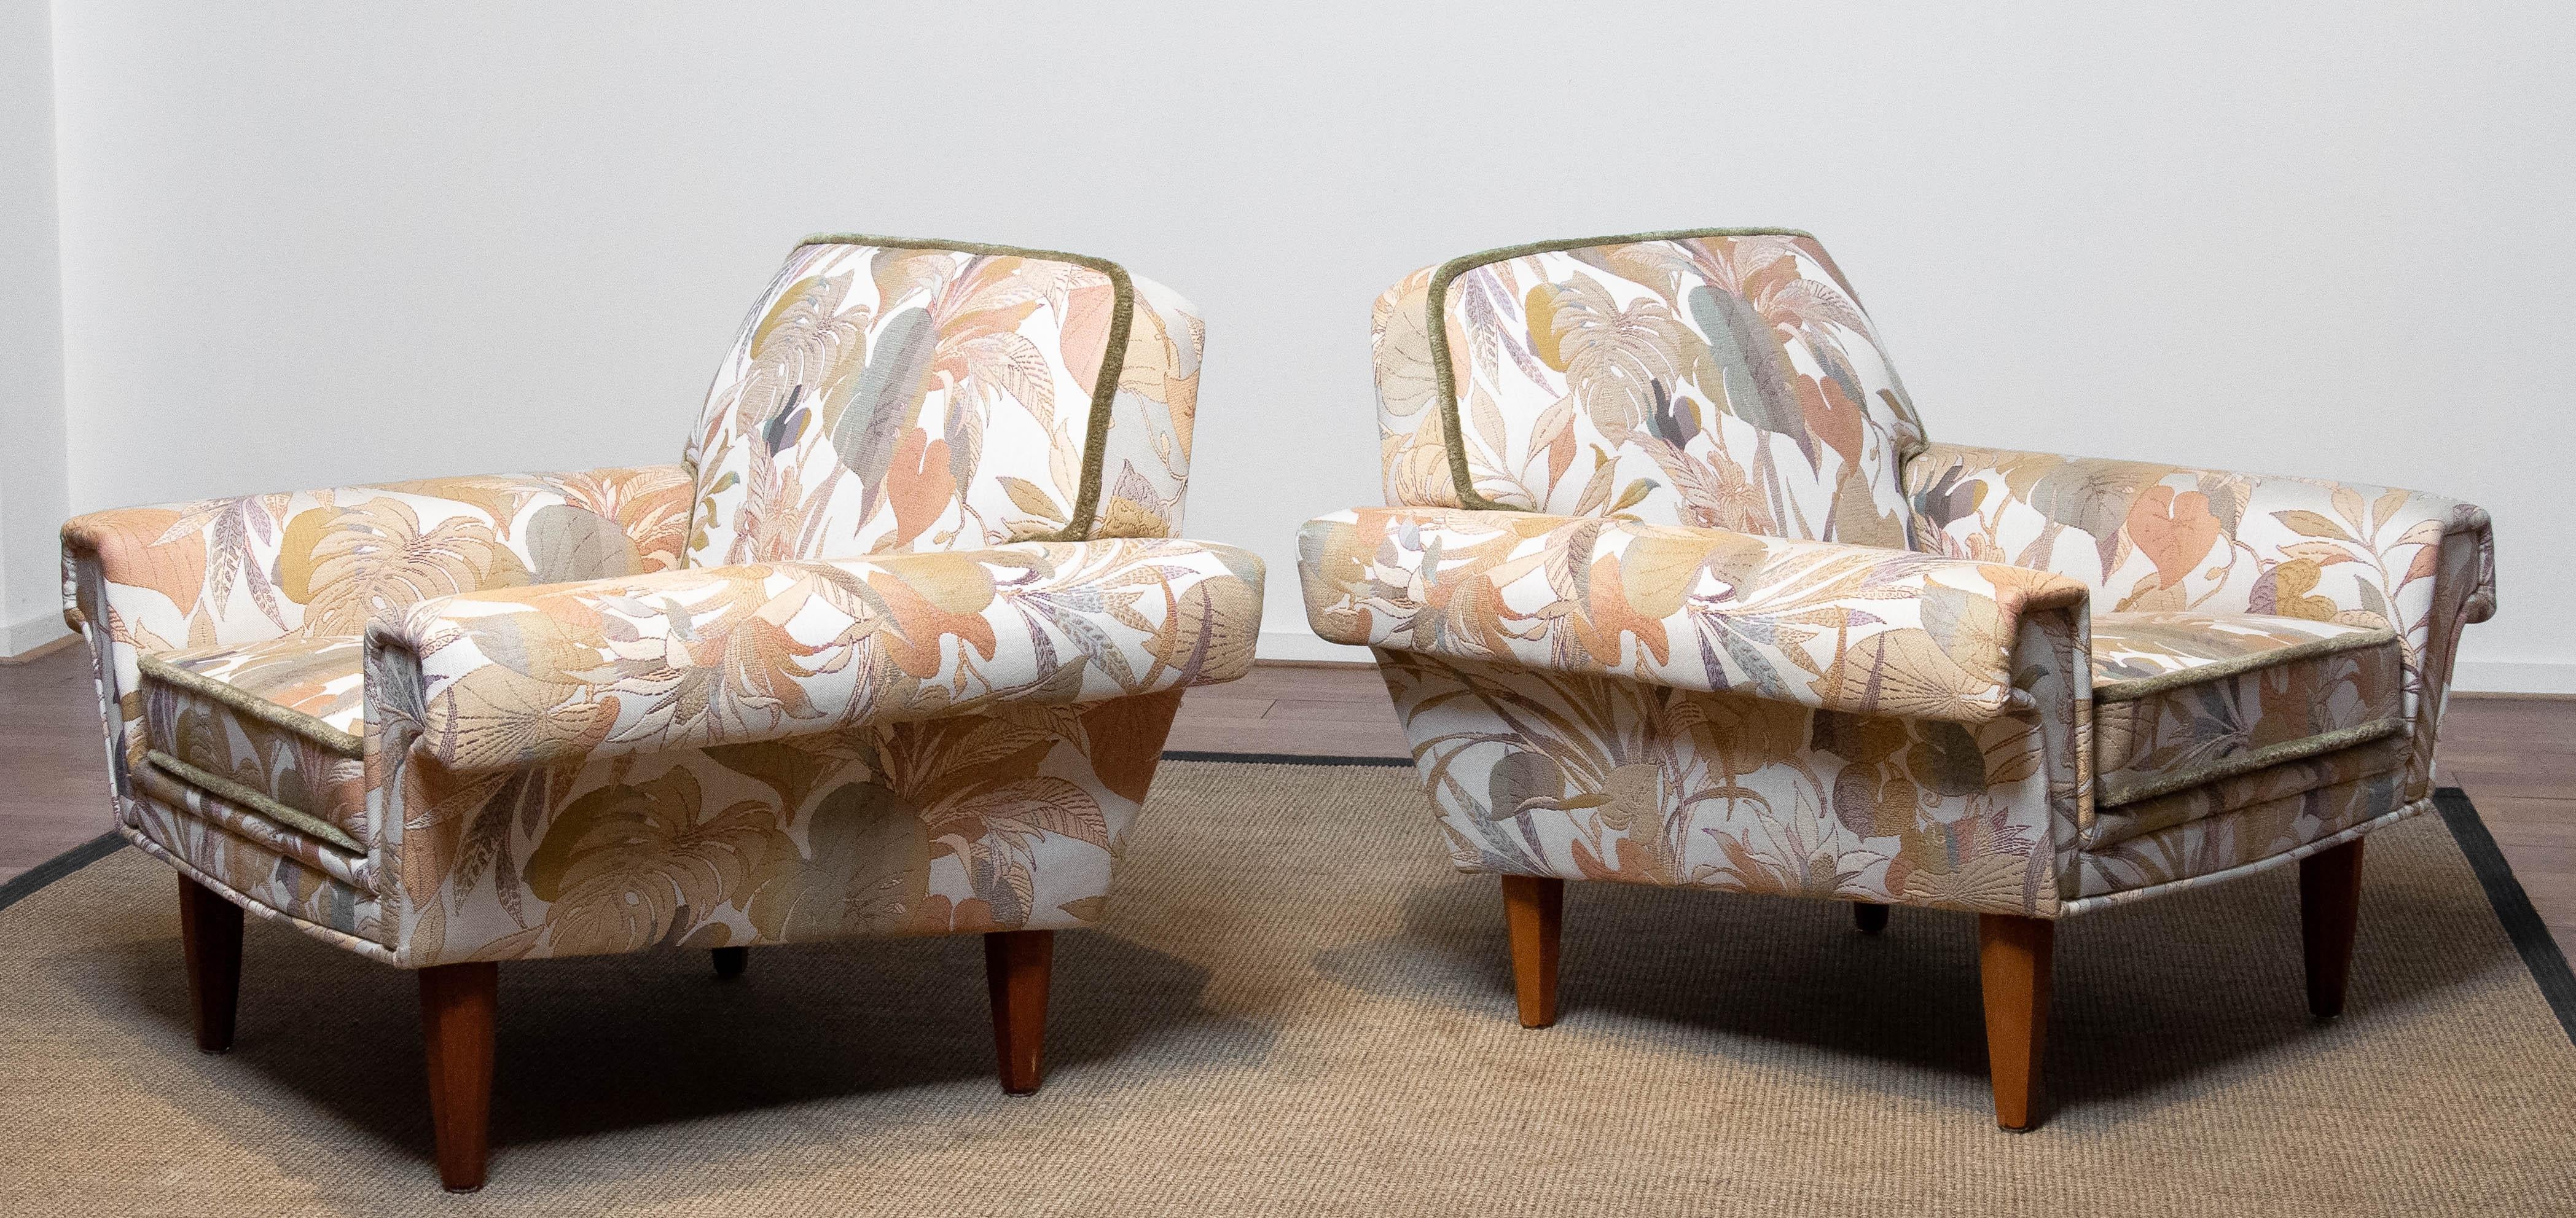 Pair Low Back Lounge Chairs Upholstered Floral Jacquard Fabric From Denmark 1970 For Sale 1